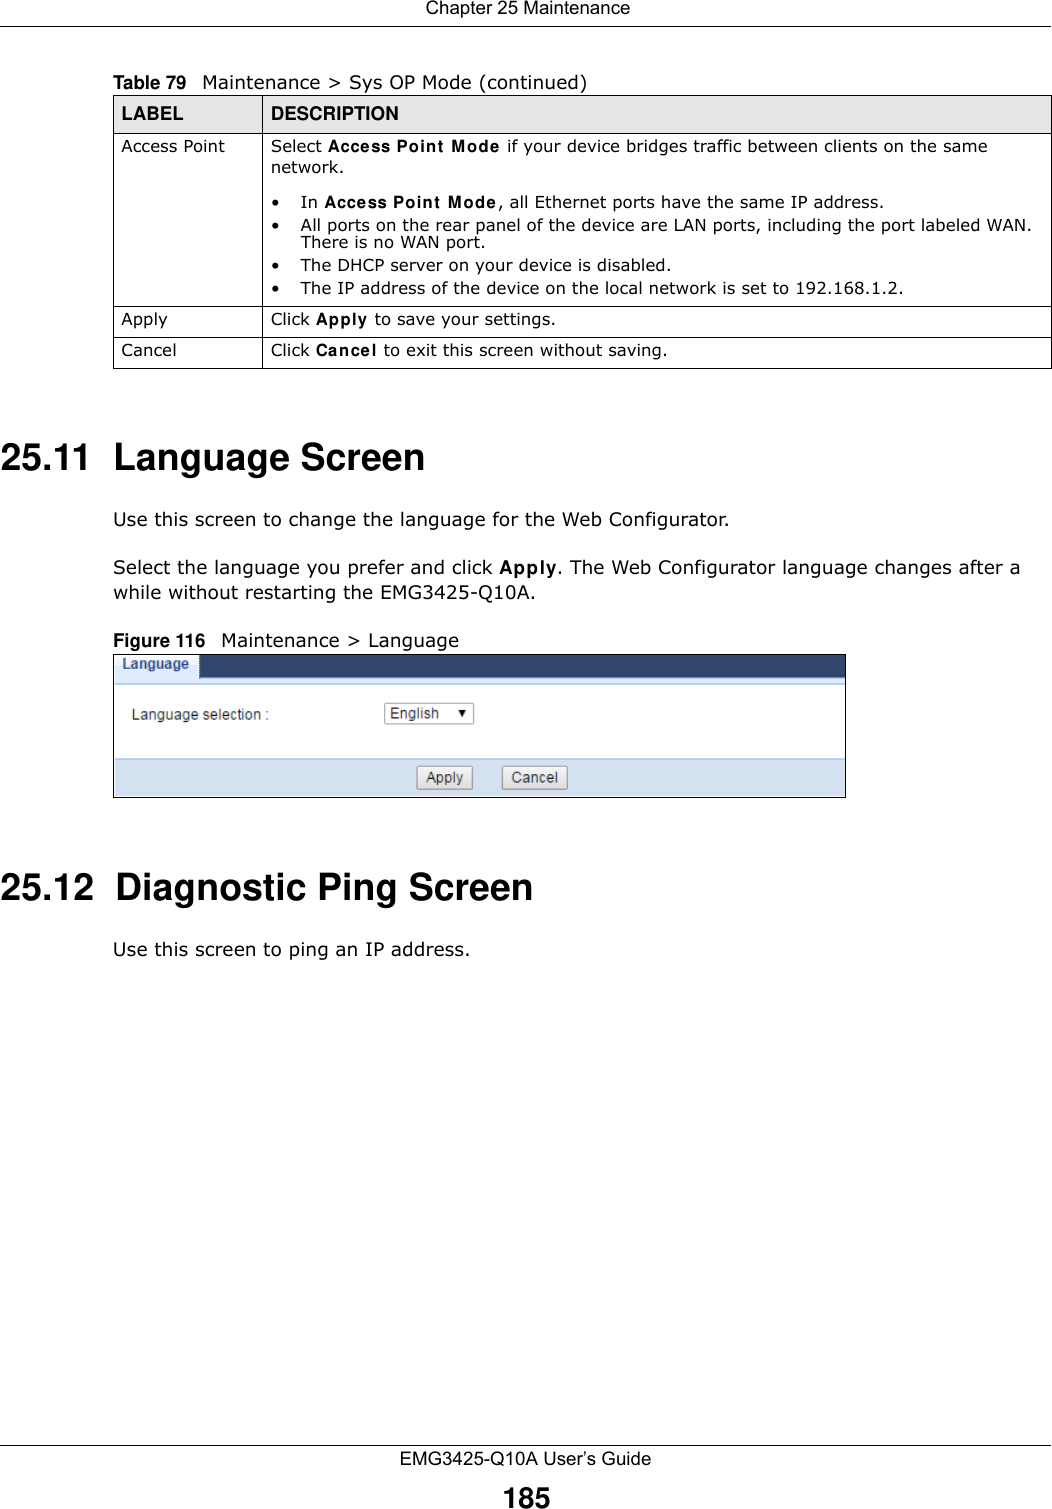  Chapter 25 MaintenanceEMG3425-Q10A User’s Guide18525.11  Language ScreenUse this screen to change the language for the Web Configurator.Select the language you prefer and click Apply. The Web Configurator language changes after a while without restarting the EMG3425-Q10A.Figure 116   Maintenance &gt; Language 25.12  Diagnostic Ping ScreenUse this screen to ping an IP address. Access Point Select Access Point  M ode  if your device bridges traffic between clients on the same network.•In Acce ss Poin t  M ode , all Ethernet ports have the same IP address. • All ports on the rear panel of the device are LAN ports, including the port labeled WAN. There is no WAN port.• The DHCP server on your device is disabled. • The IP address of the device on the local network is set to 192.168.1.2.Apply Click Apply to save your settings.Cancel Click Cancel to exit this screen without saving.Table 79   Maintenance &gt; Sys OP Mode (continued)LABEL DESCRIPTION